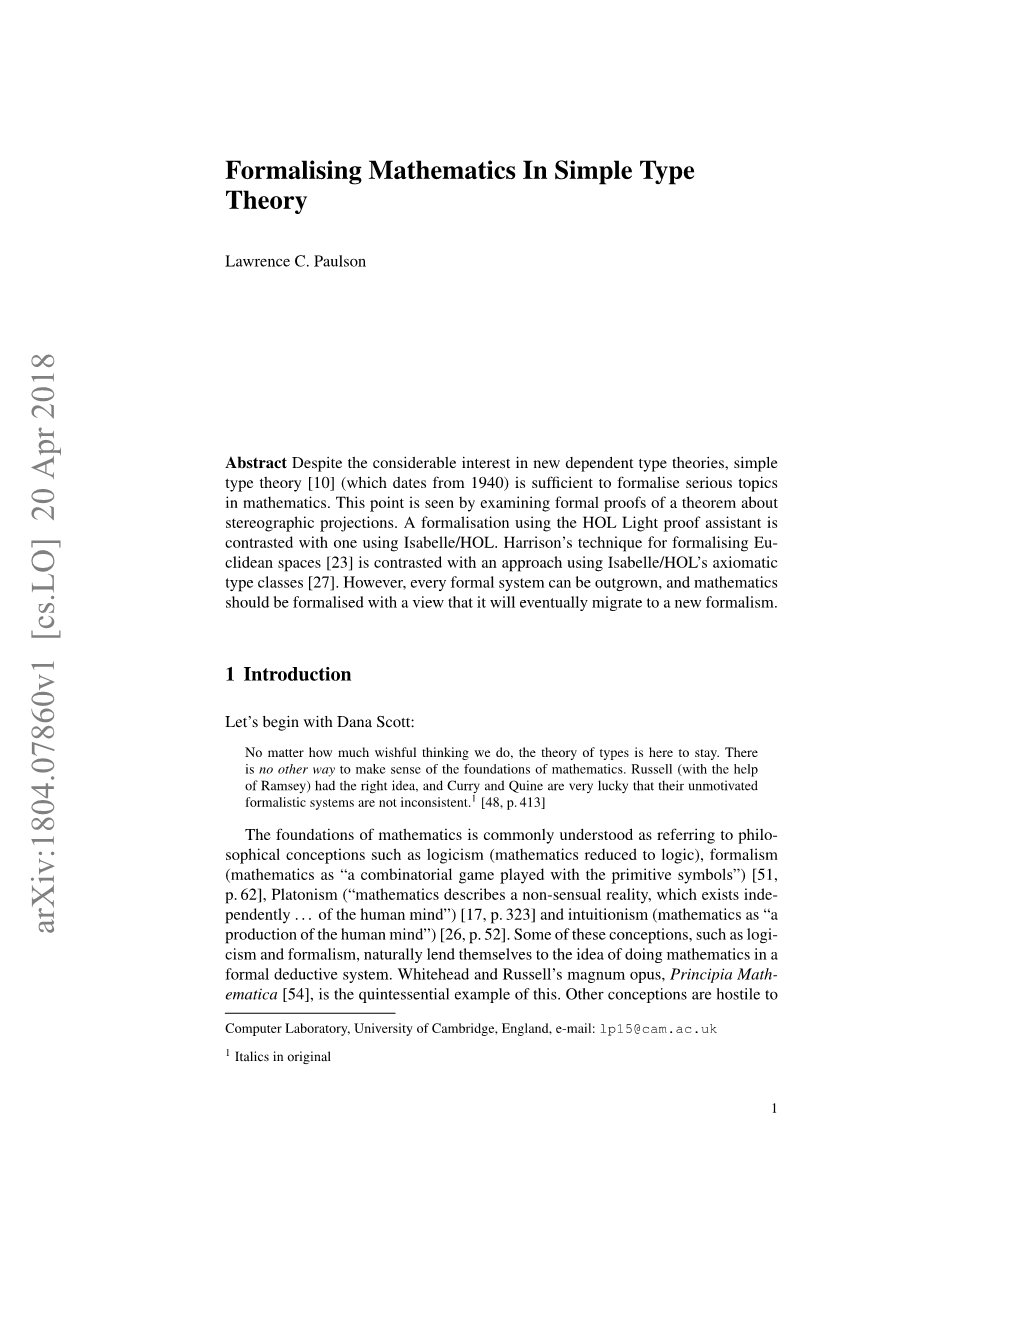 Formalising Mathematics in Simple Type Theory